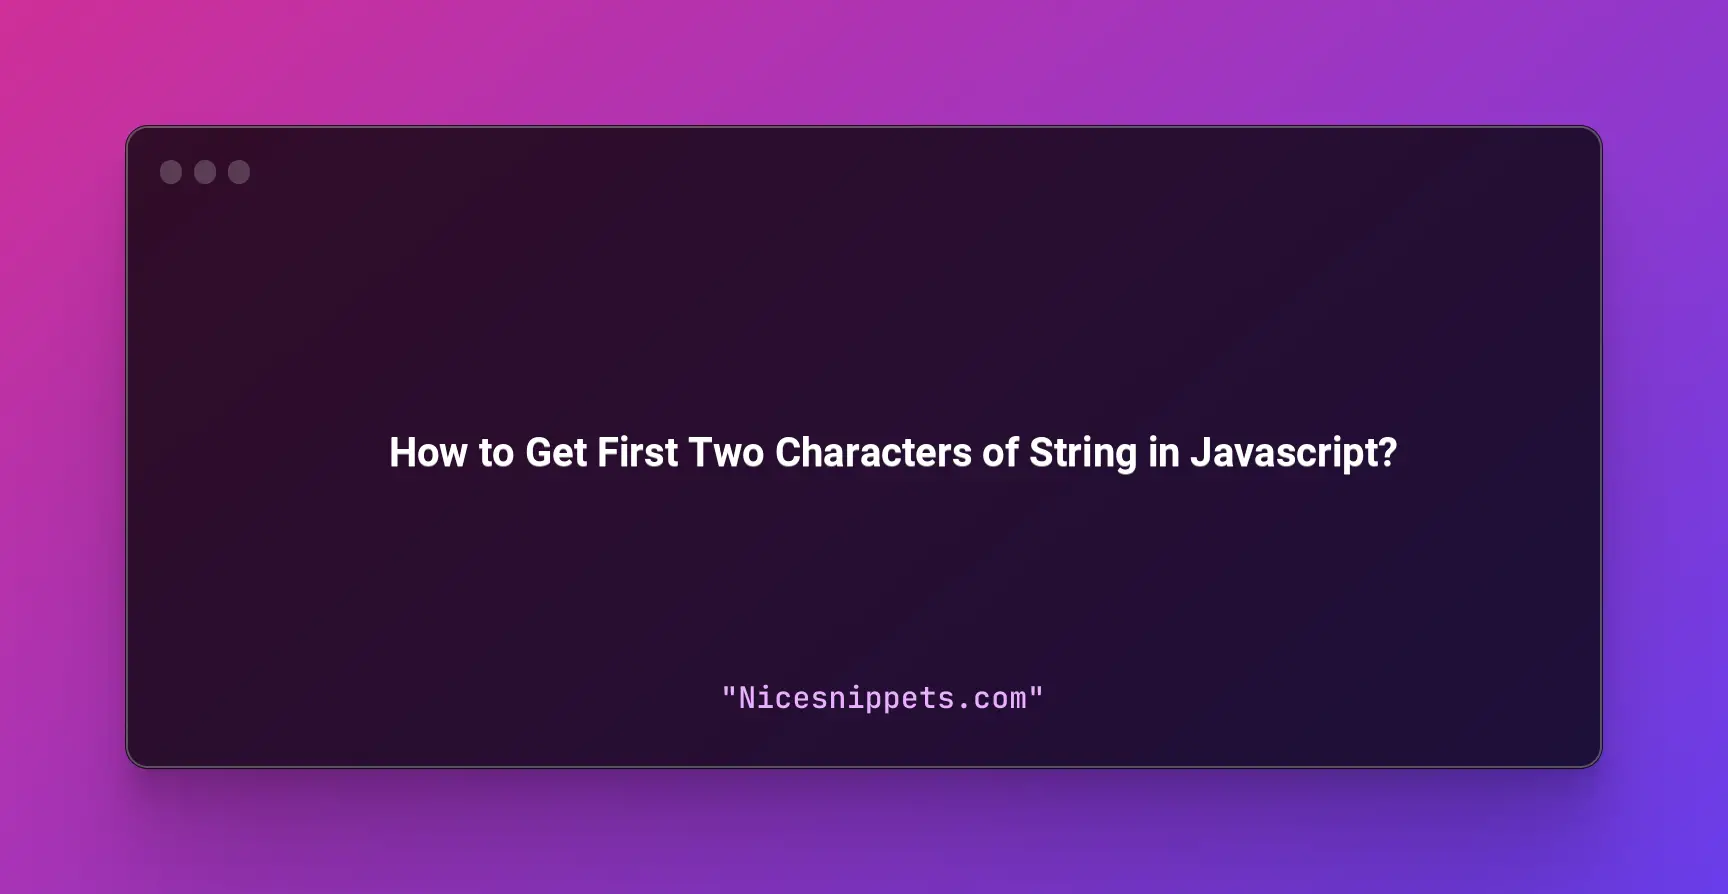 How to Get First Two Characters of String in Javascript?